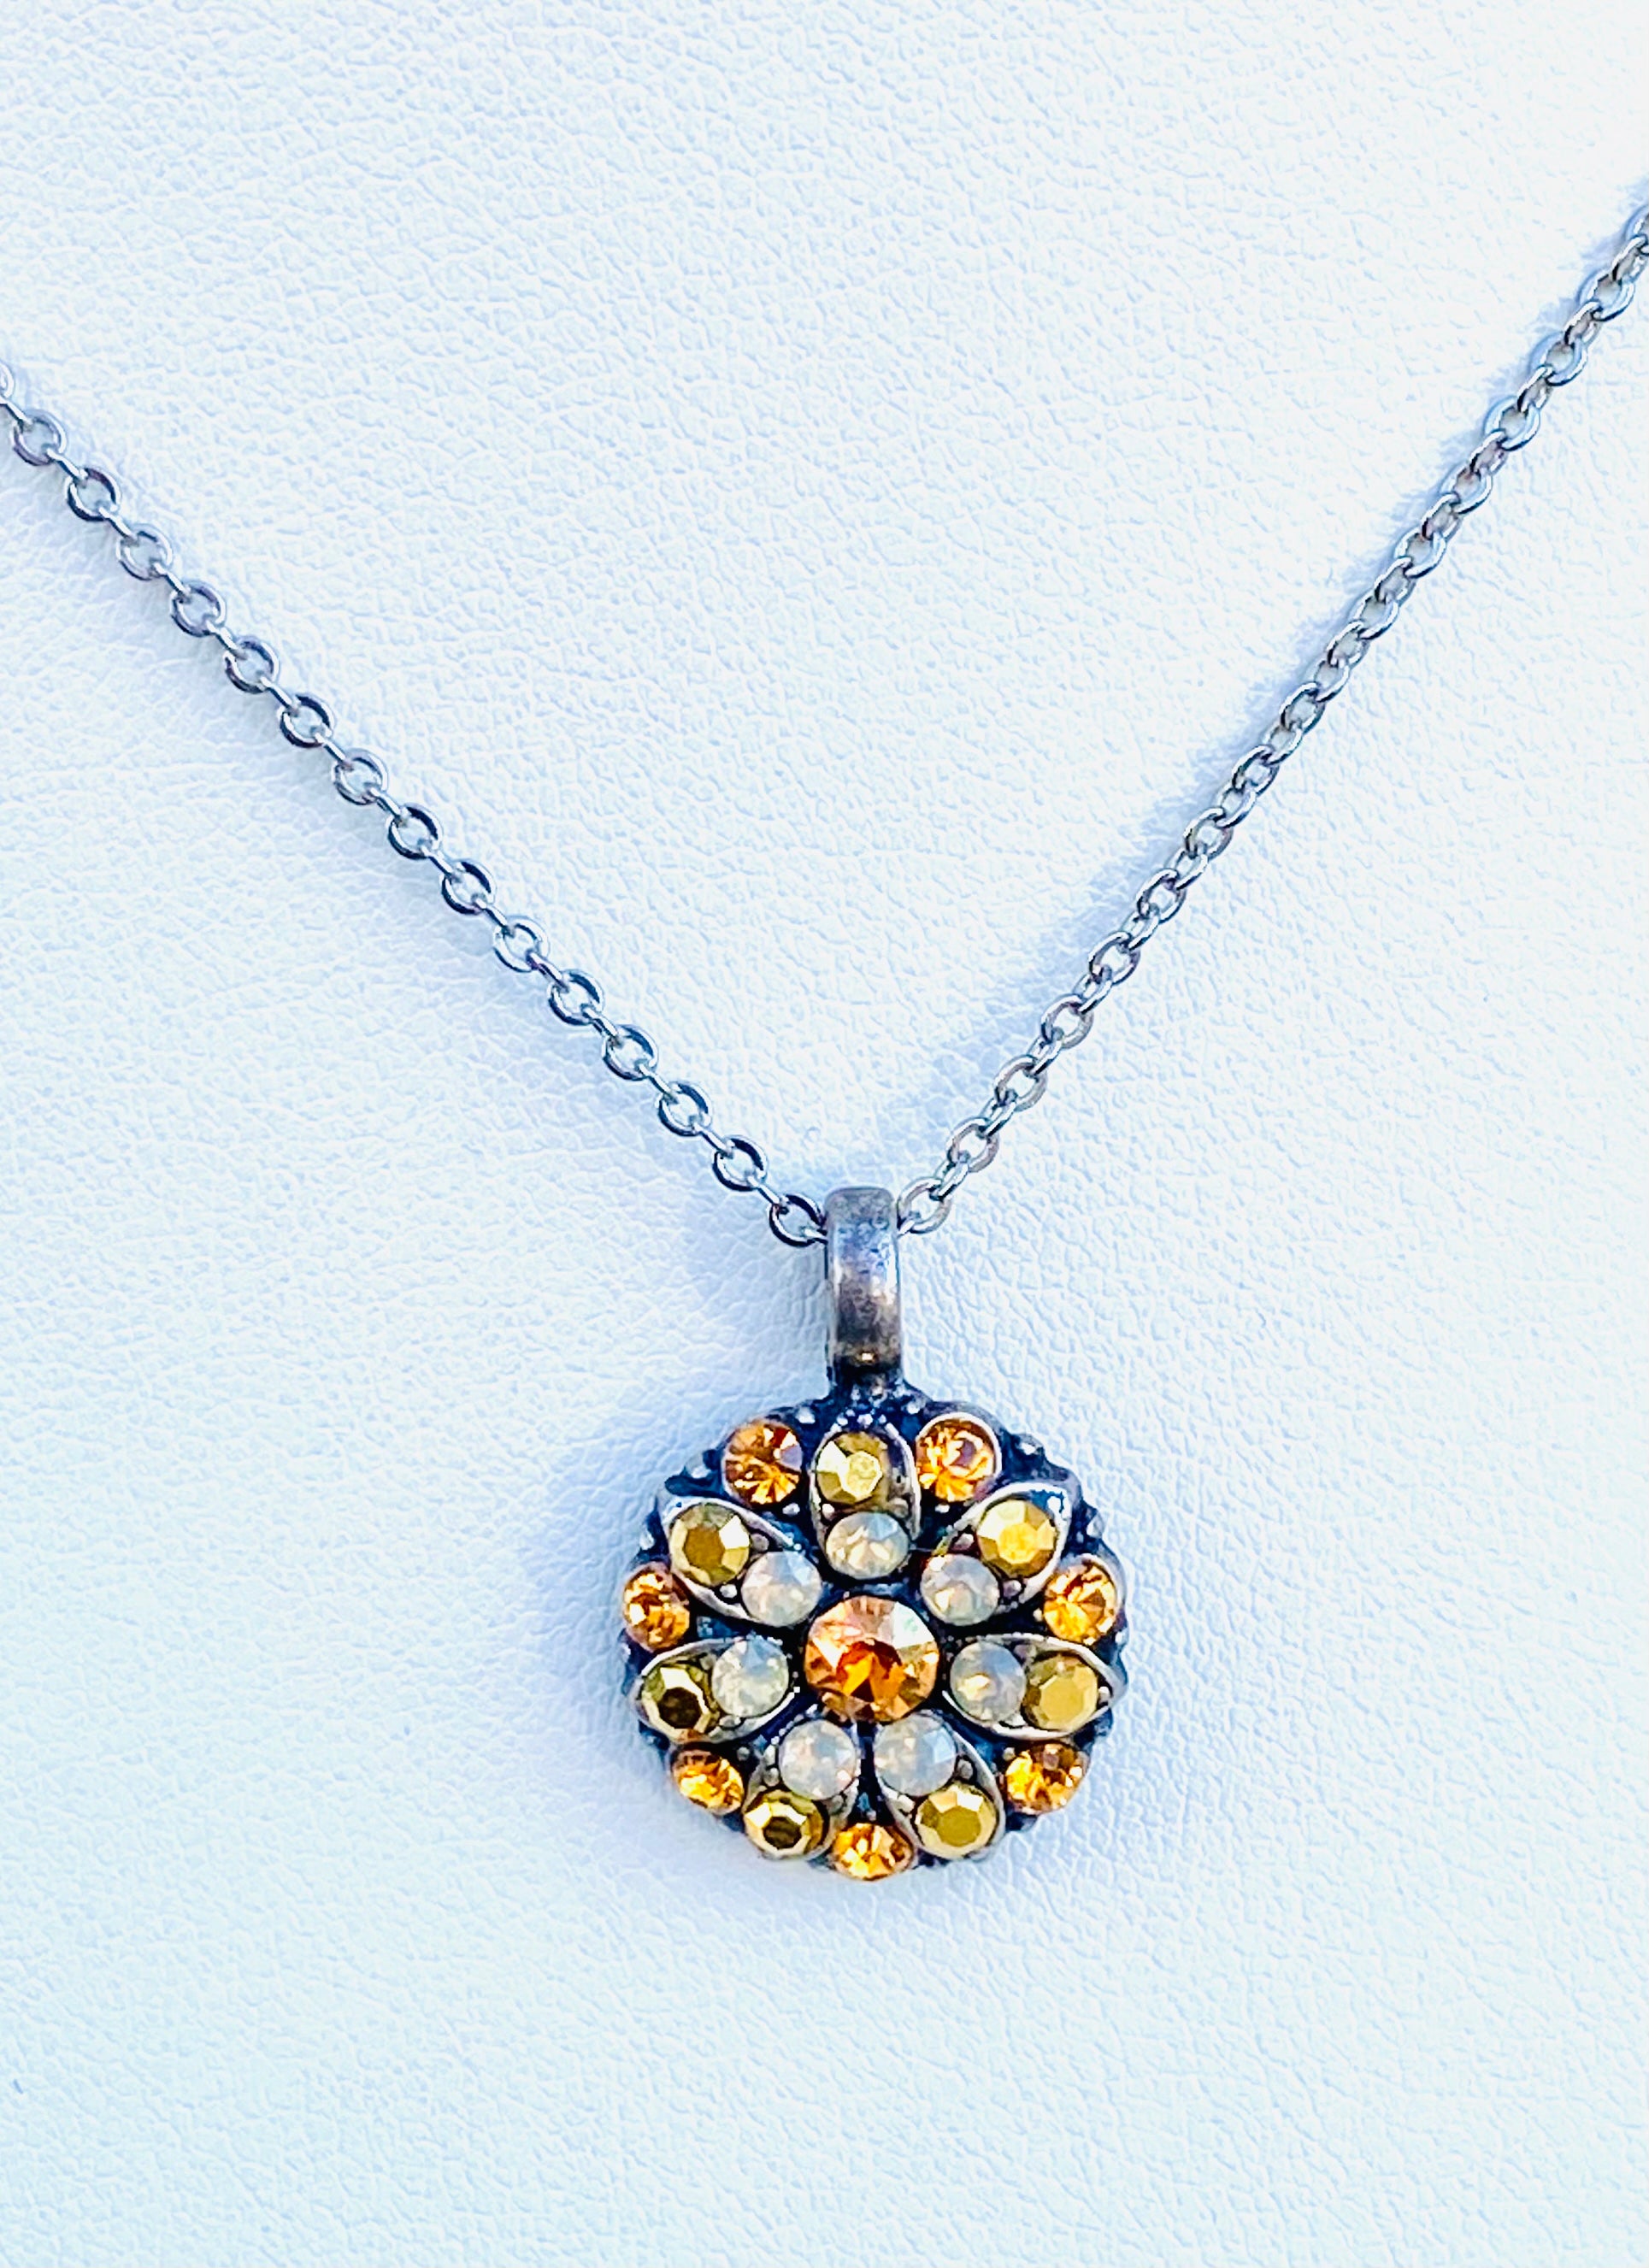 Mariana Antiqued Silver Guardian Angel Necklace in "Sunflower"